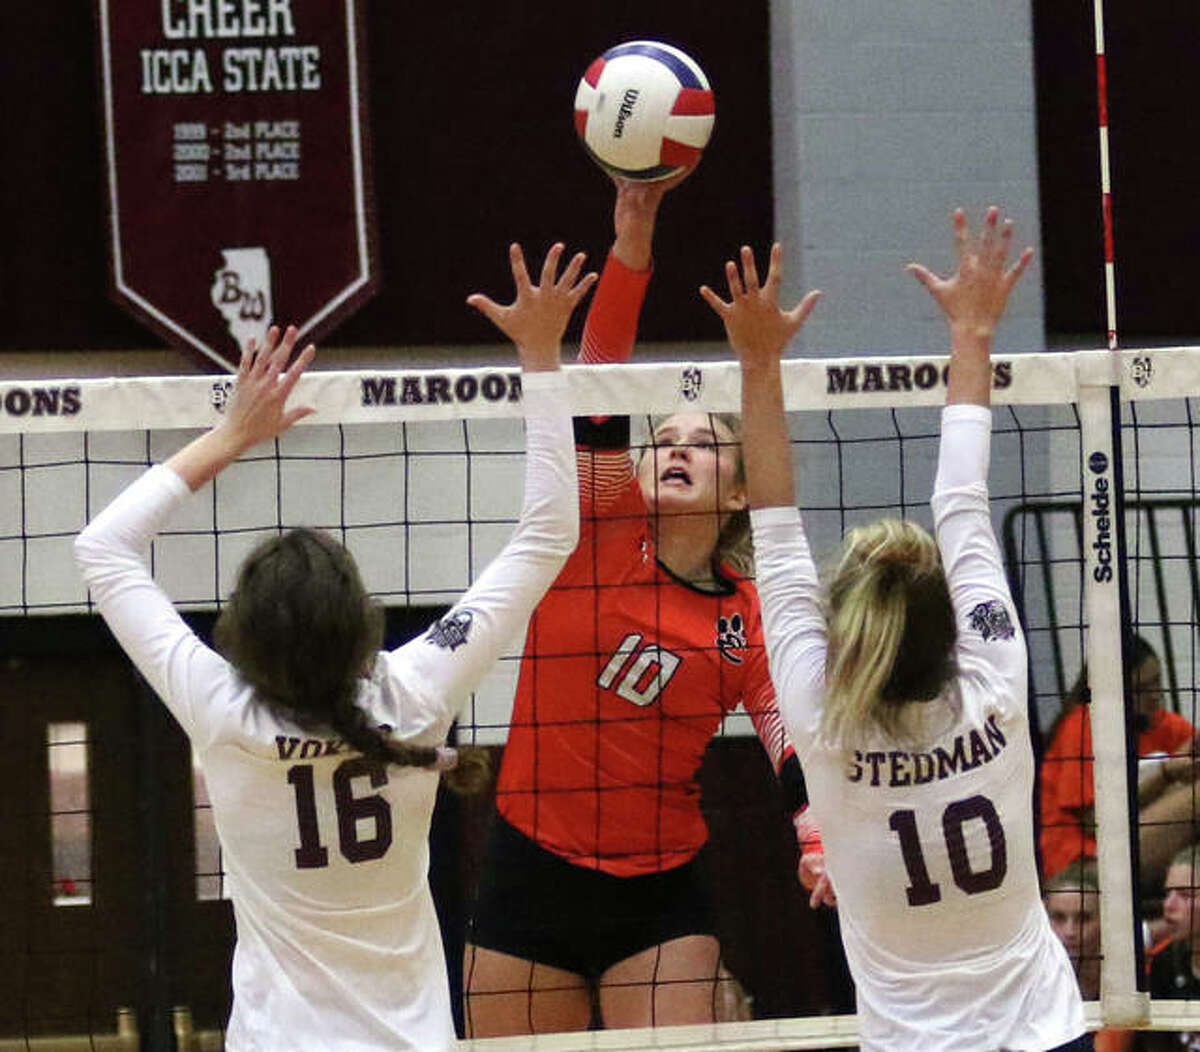 Edwardsville sophomore Emma Garner (middle) hits for one of her five kills in the third set before Belleville West’s Sydney Vokes (16) and KC Stedman (10) can rise up for a block on Tuesday night at Belleville.